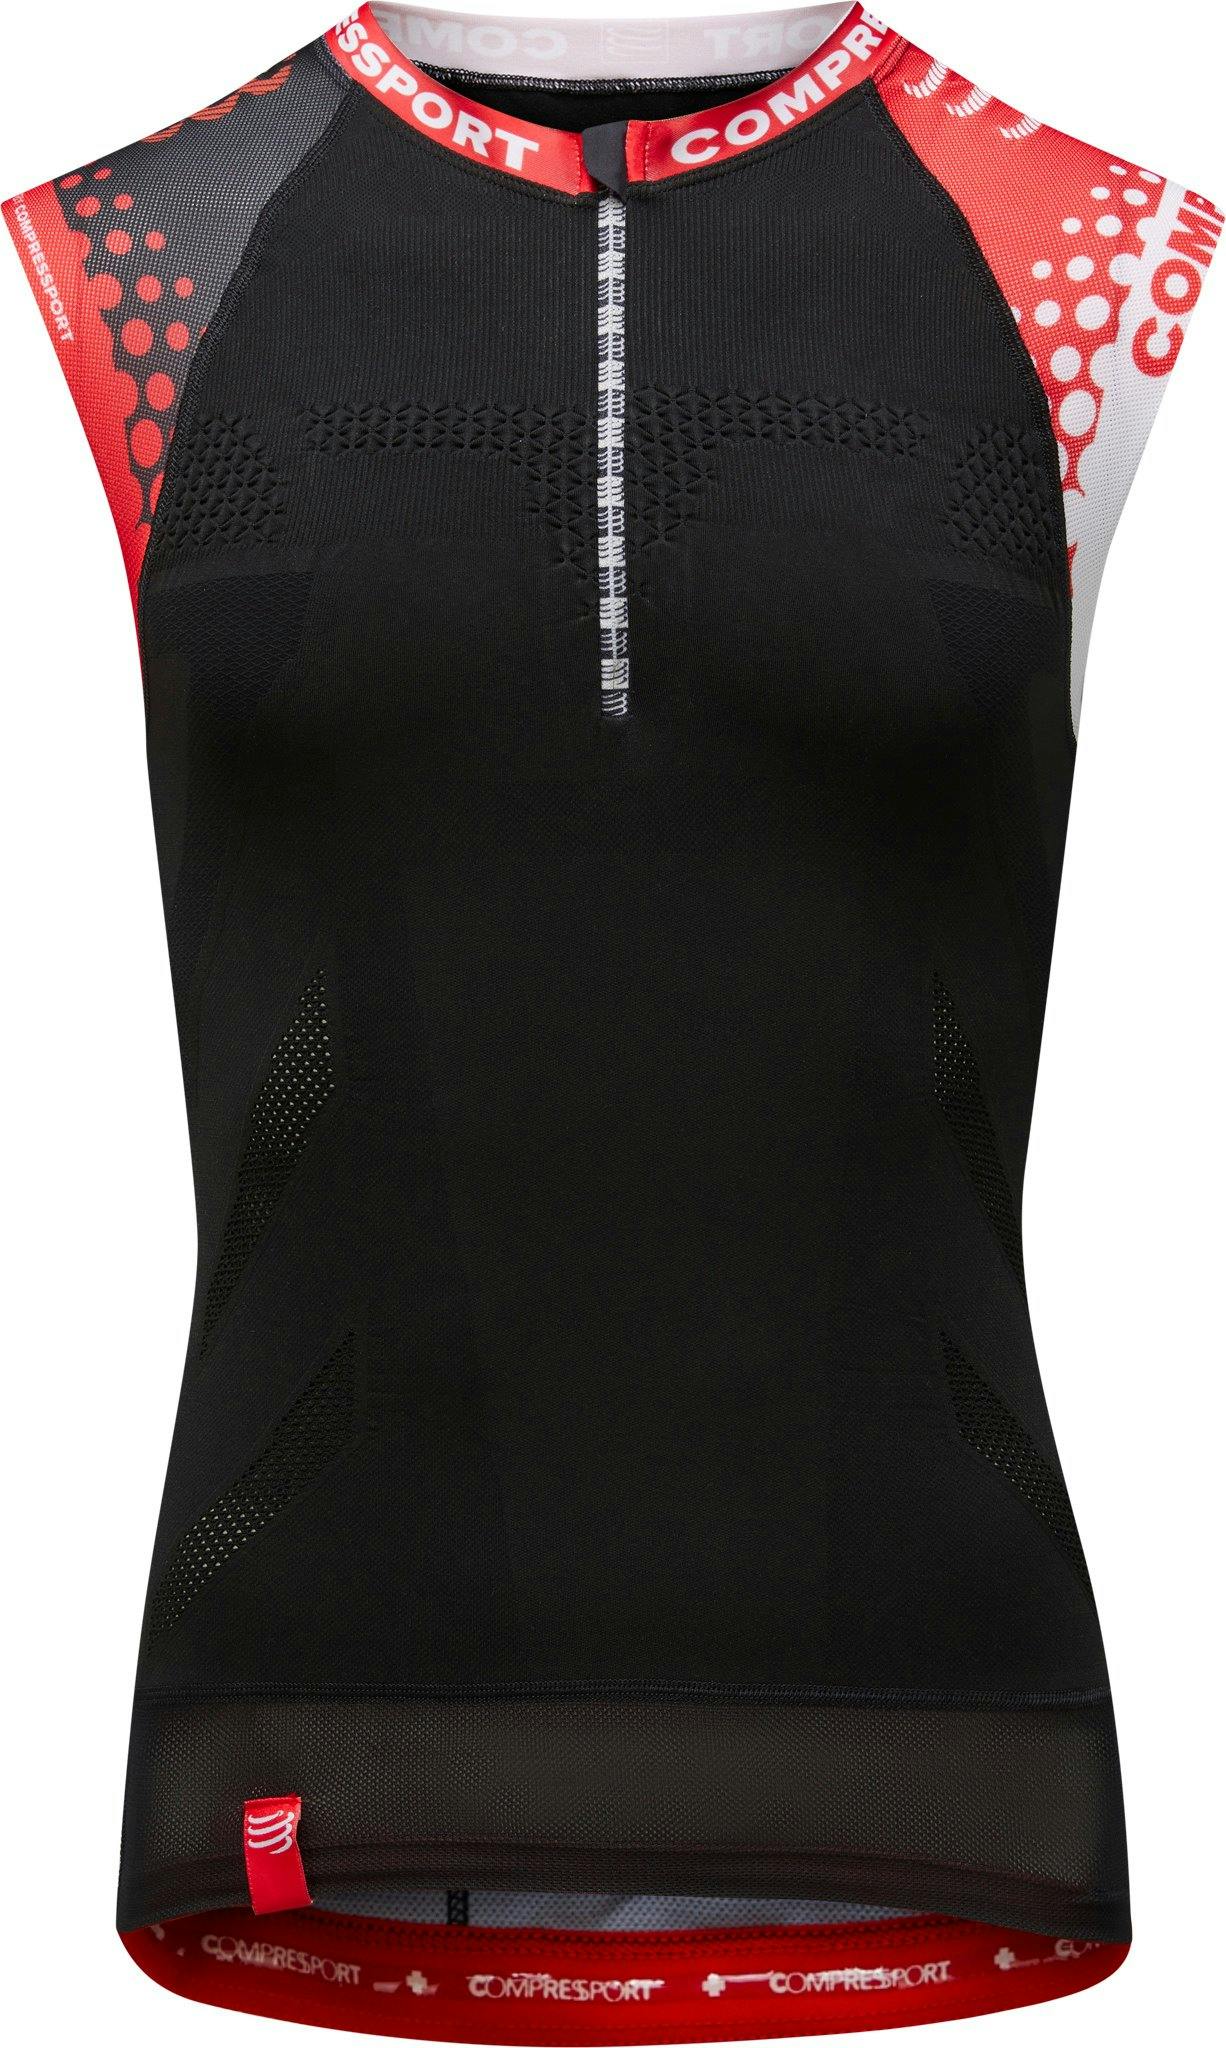 Product image for Trail Running Jersey - Men's